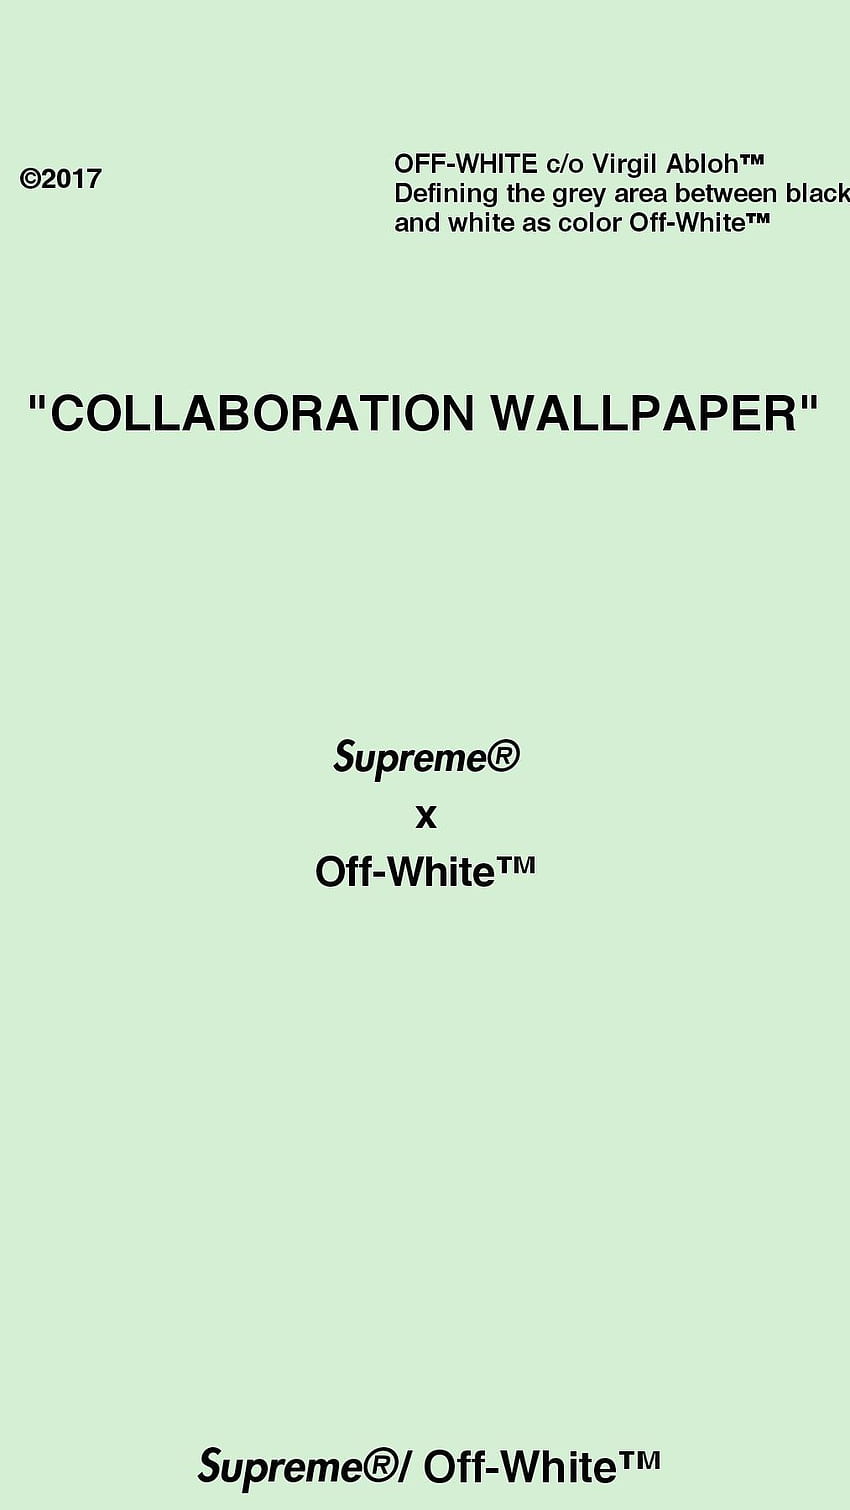 Off White Virgil Abloh posted by Samantha Peltier, off white 2022